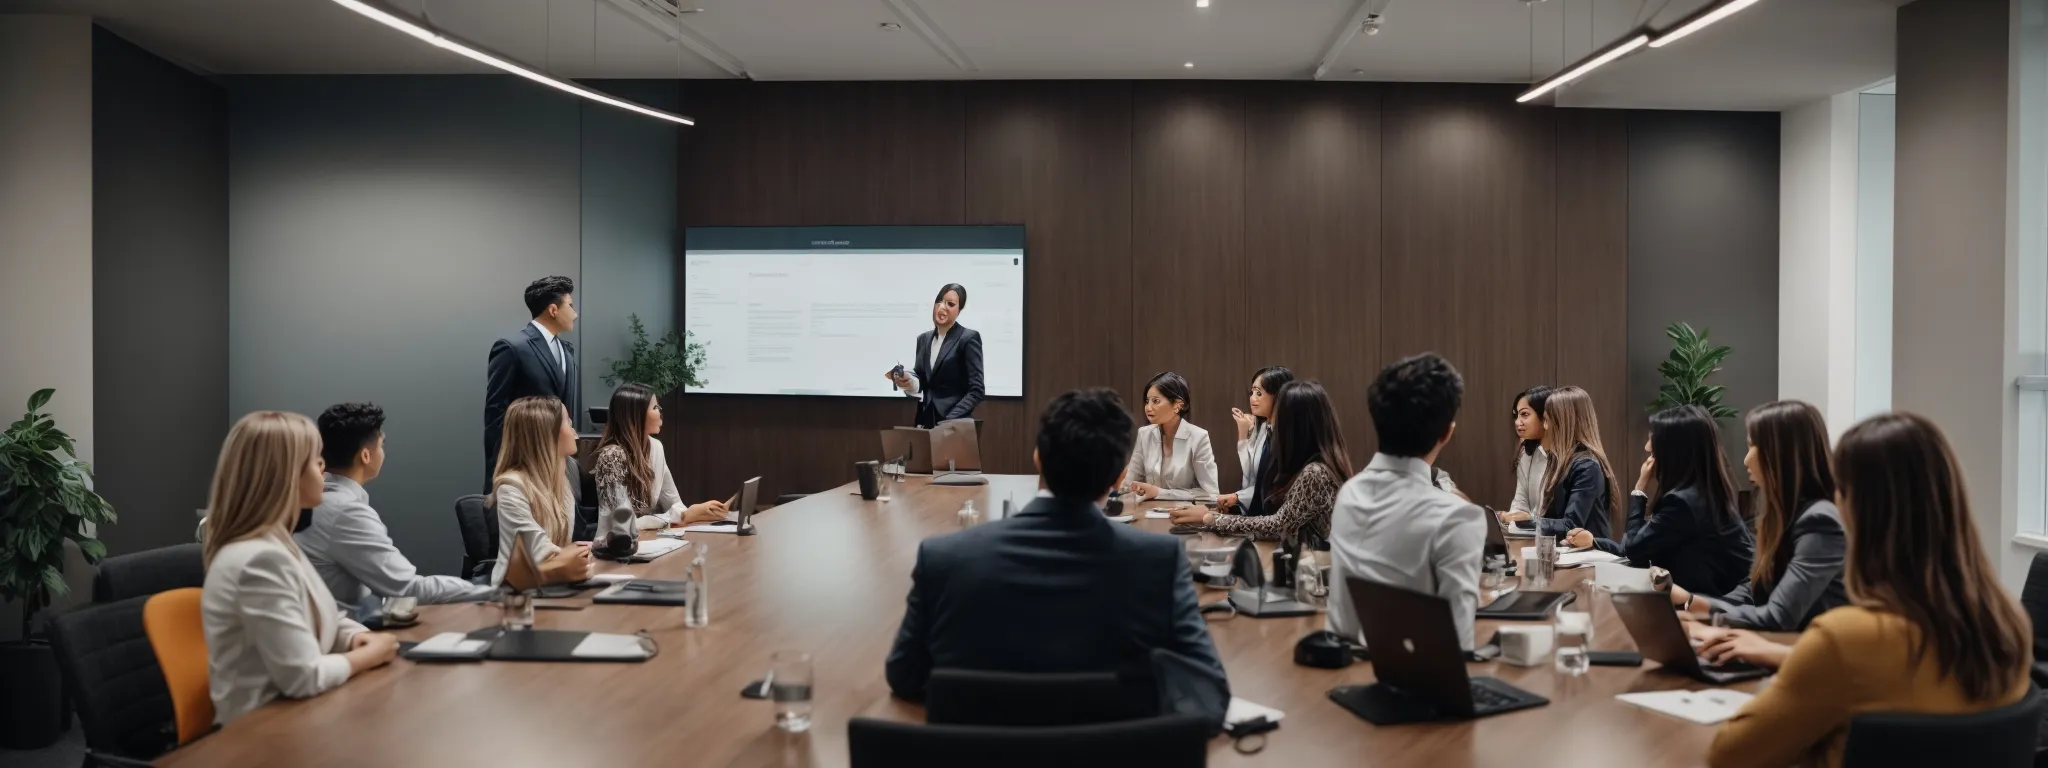 a professional marketer presents a testimonial strategy to a team in a modern office meeting room.